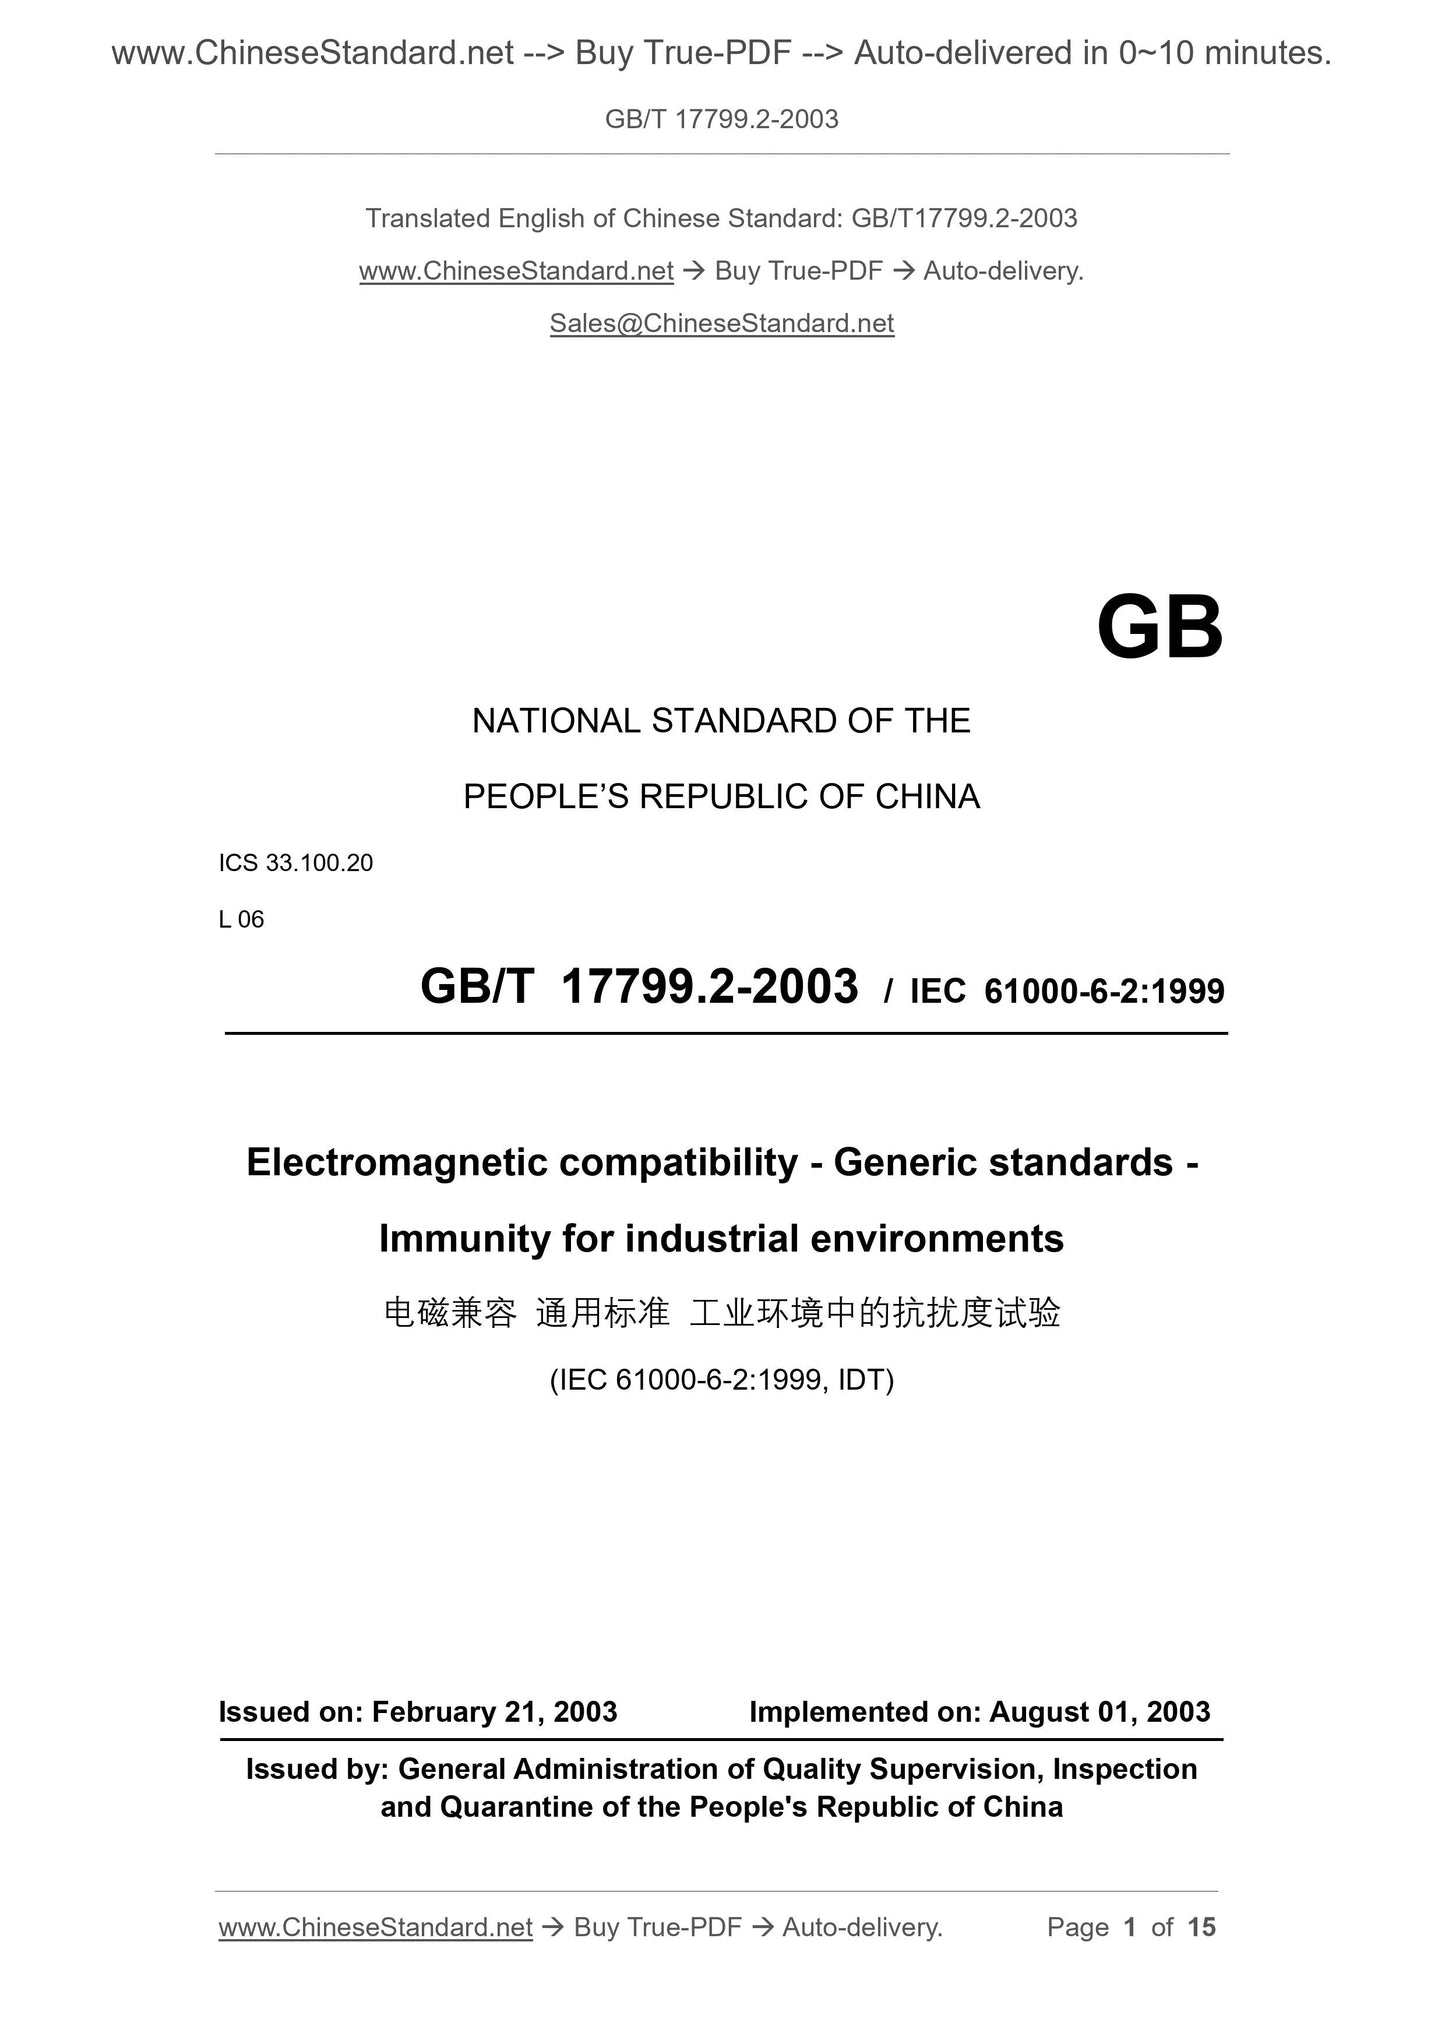 GB/T 17799.2-2003 Page 1